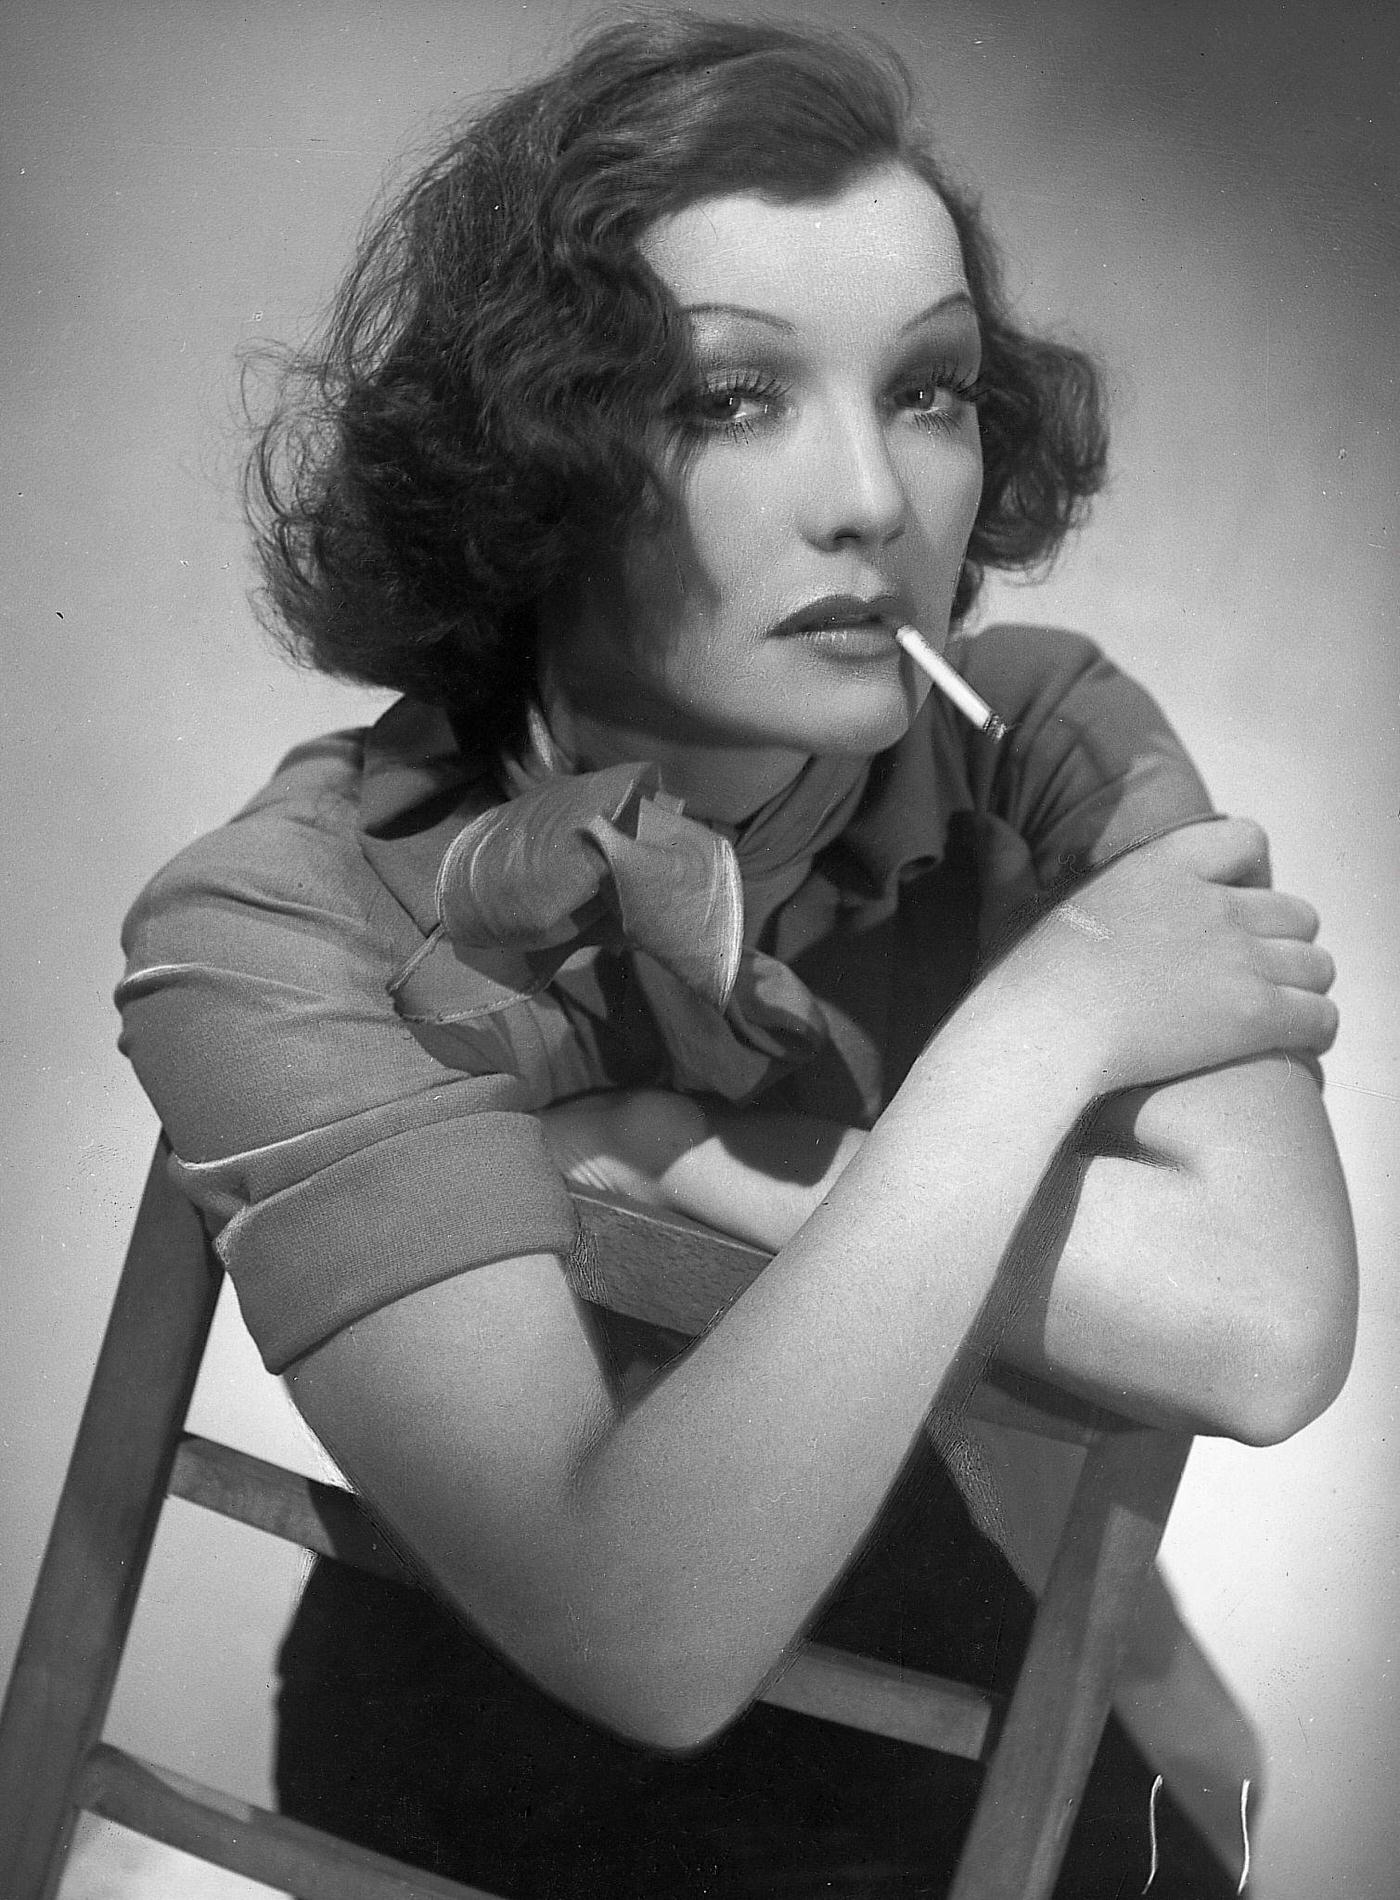 Brunette woman, rouged strongly, sits on a chair and smokes a cigarette, 1930.